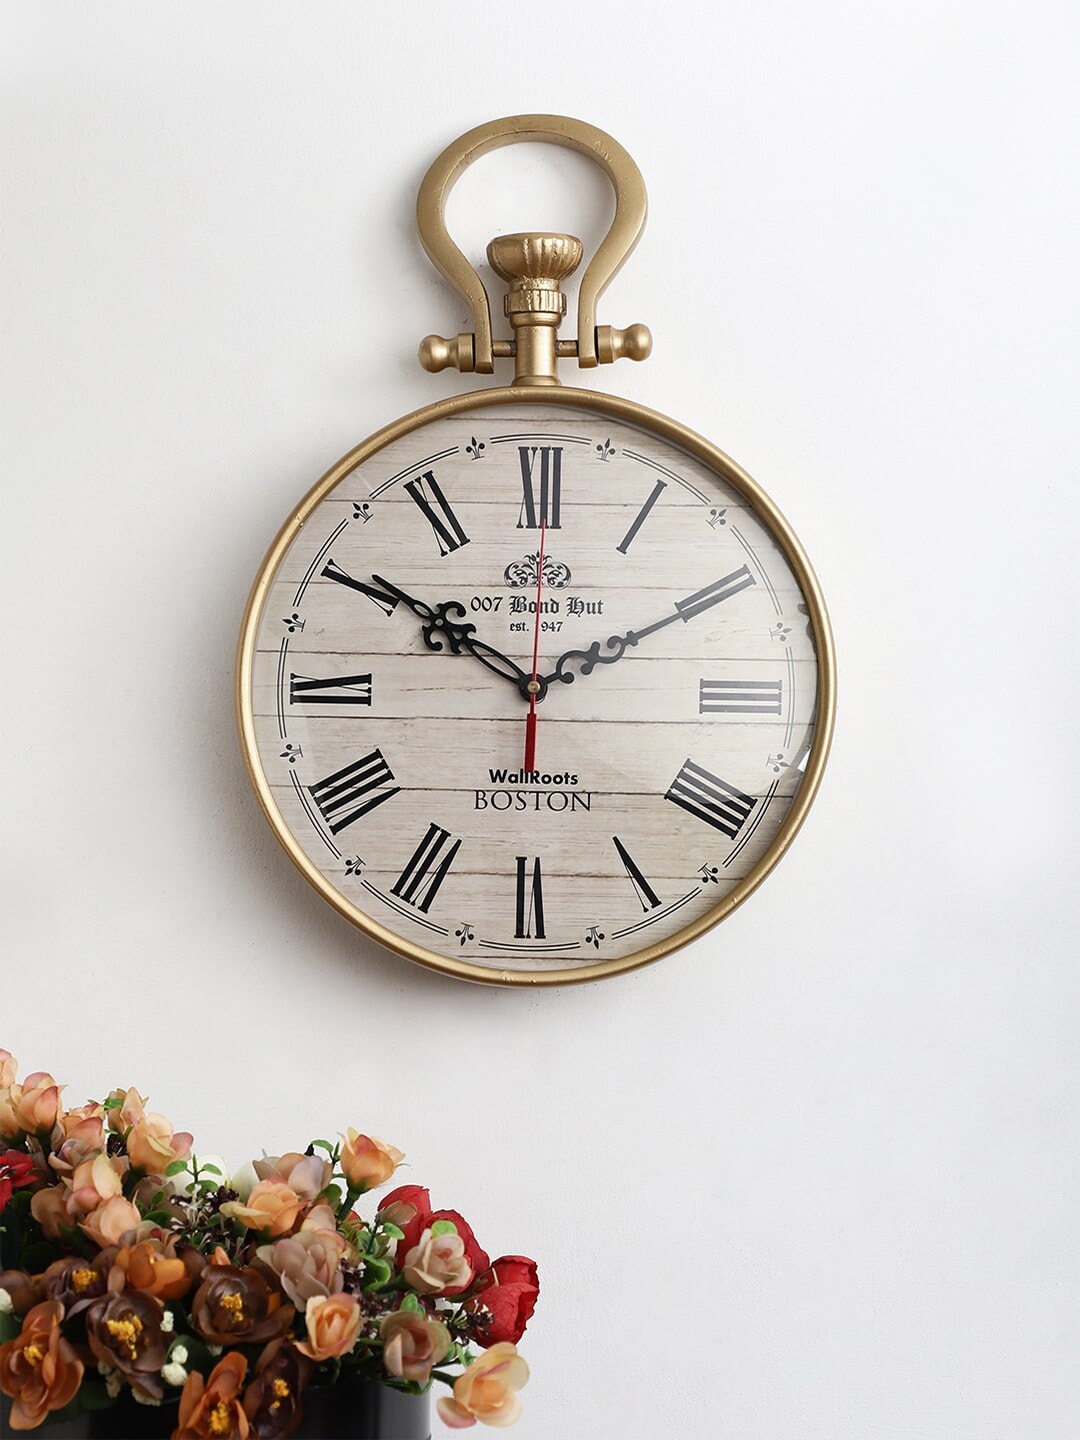 EXIM DECOR Gold-Toned & Beige Traditional Wall Roots Boston Wall Clock 36.83 cm Price in India